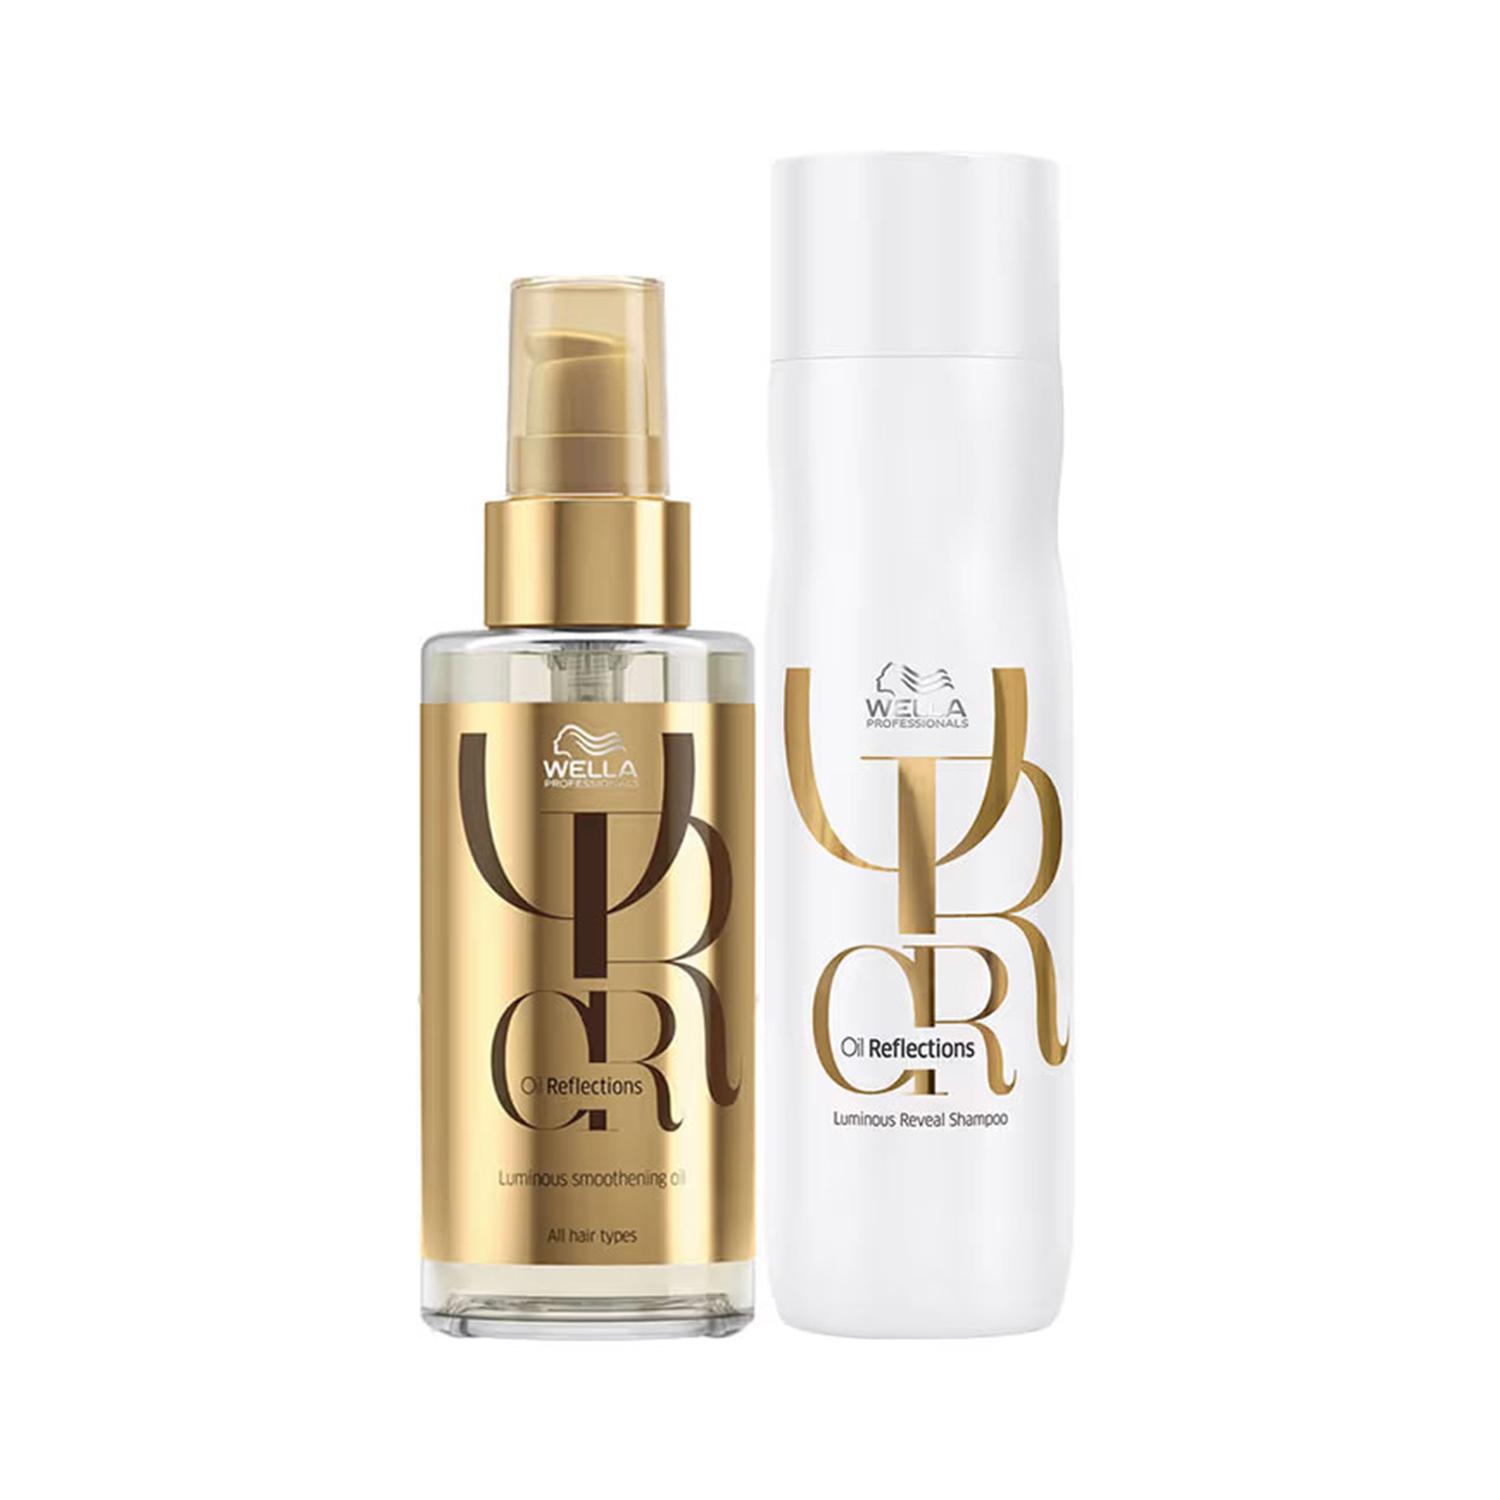 Wella Professionals | Wella Professionals Oil Reflections Luminous Shampoo 250 ml & Smoothening oil 100 ml for shiny hair